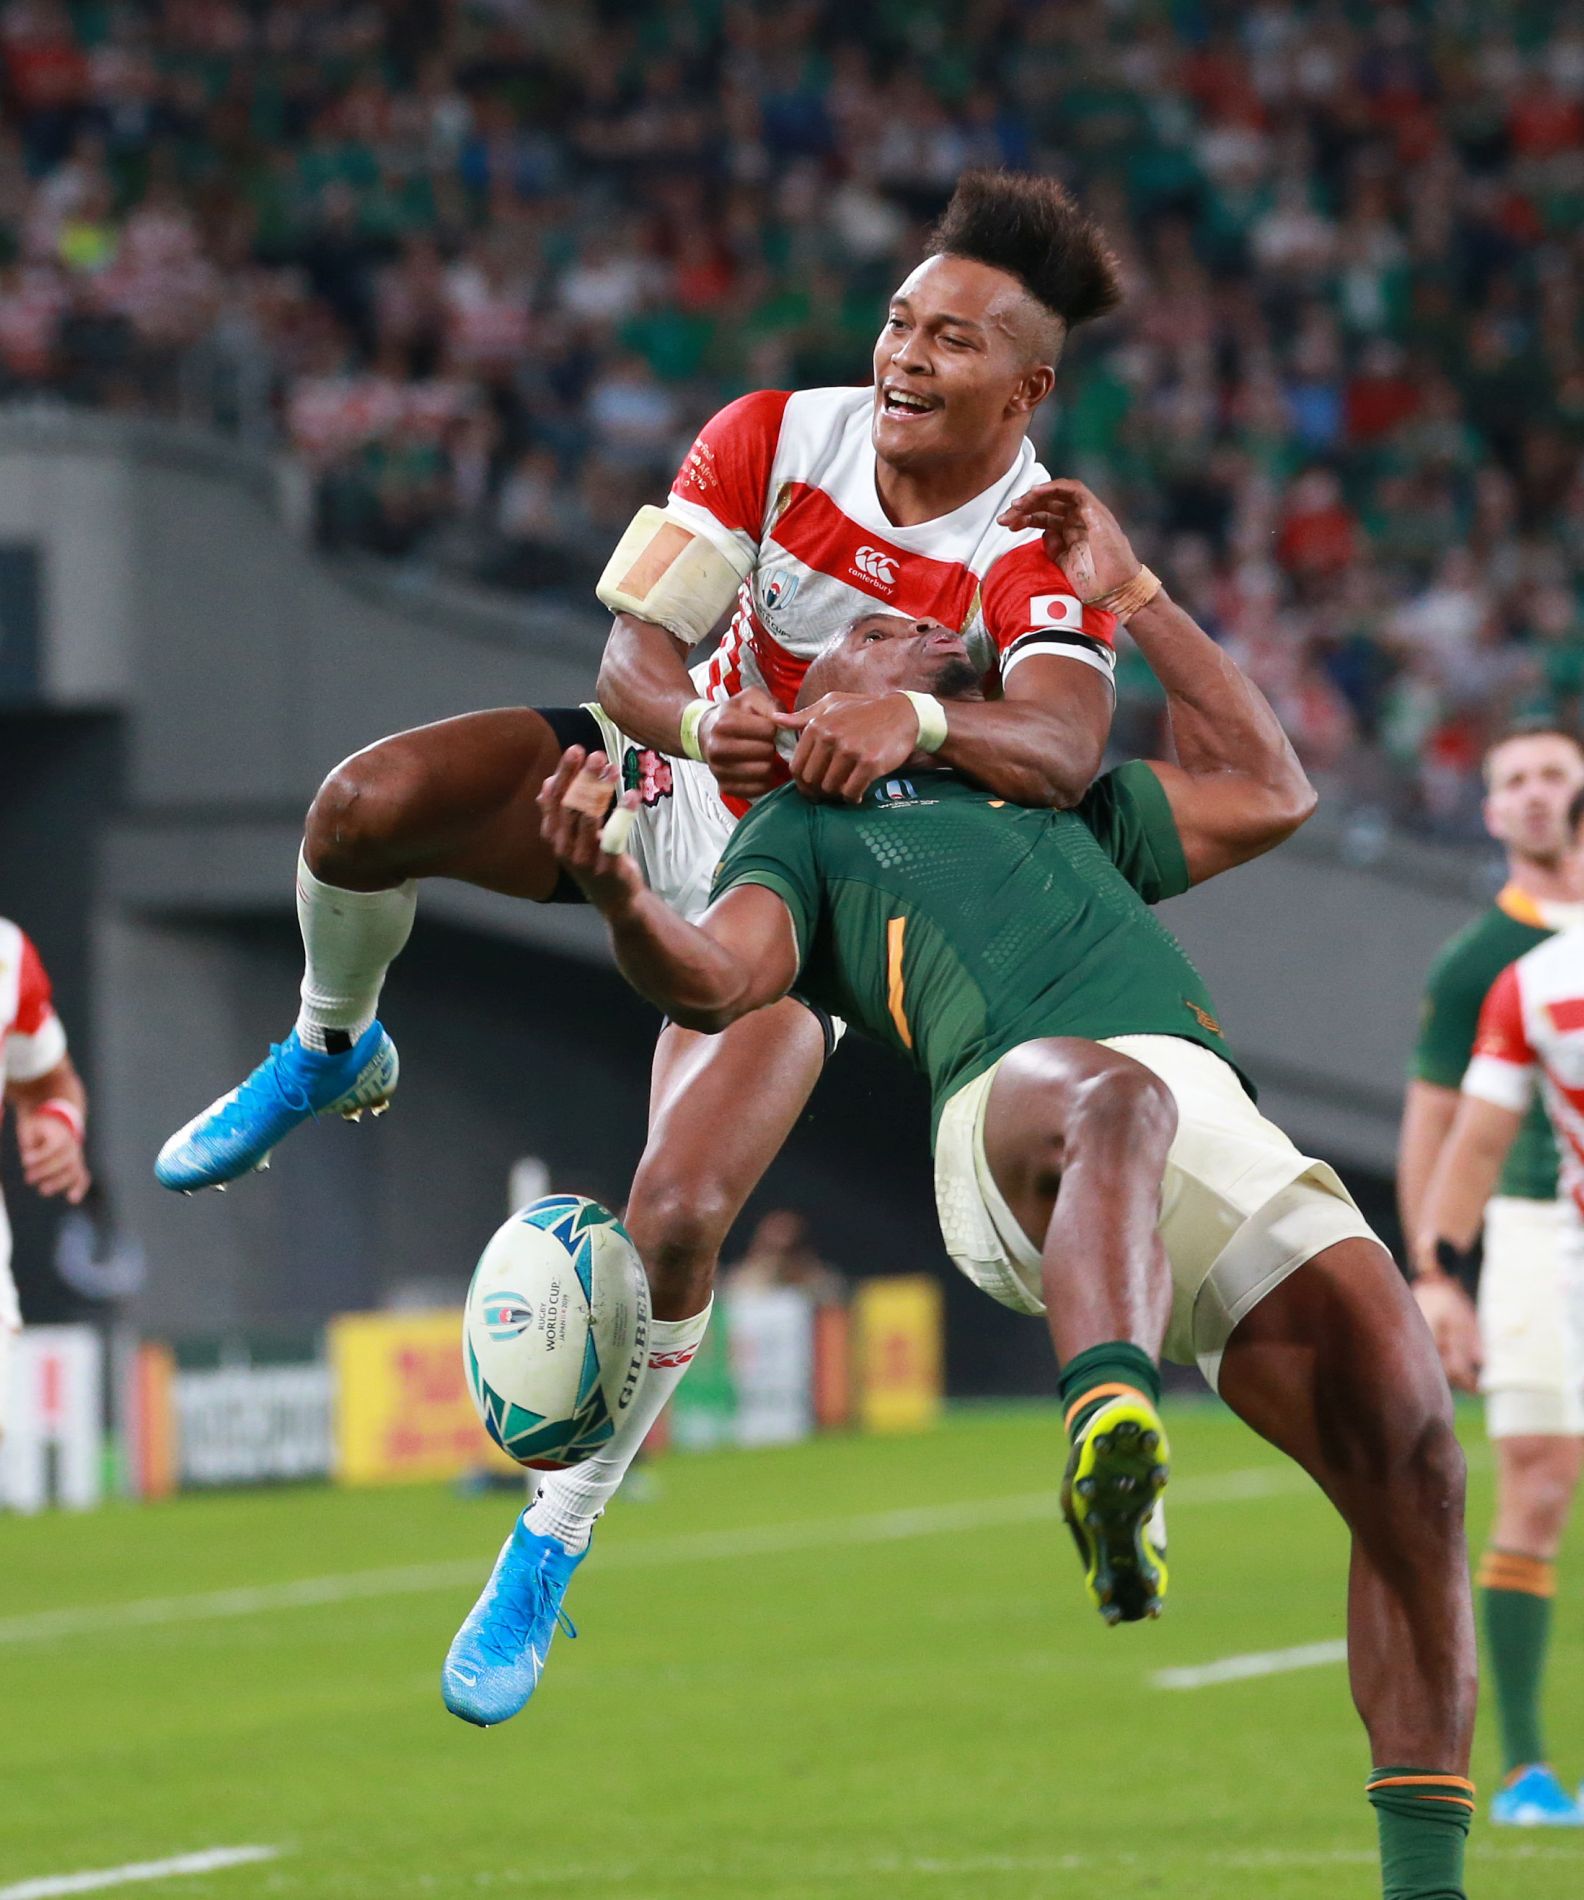 South Africa Ends Japan’s One Team Winning Streak to Move On to 5th RWC Semi-Final